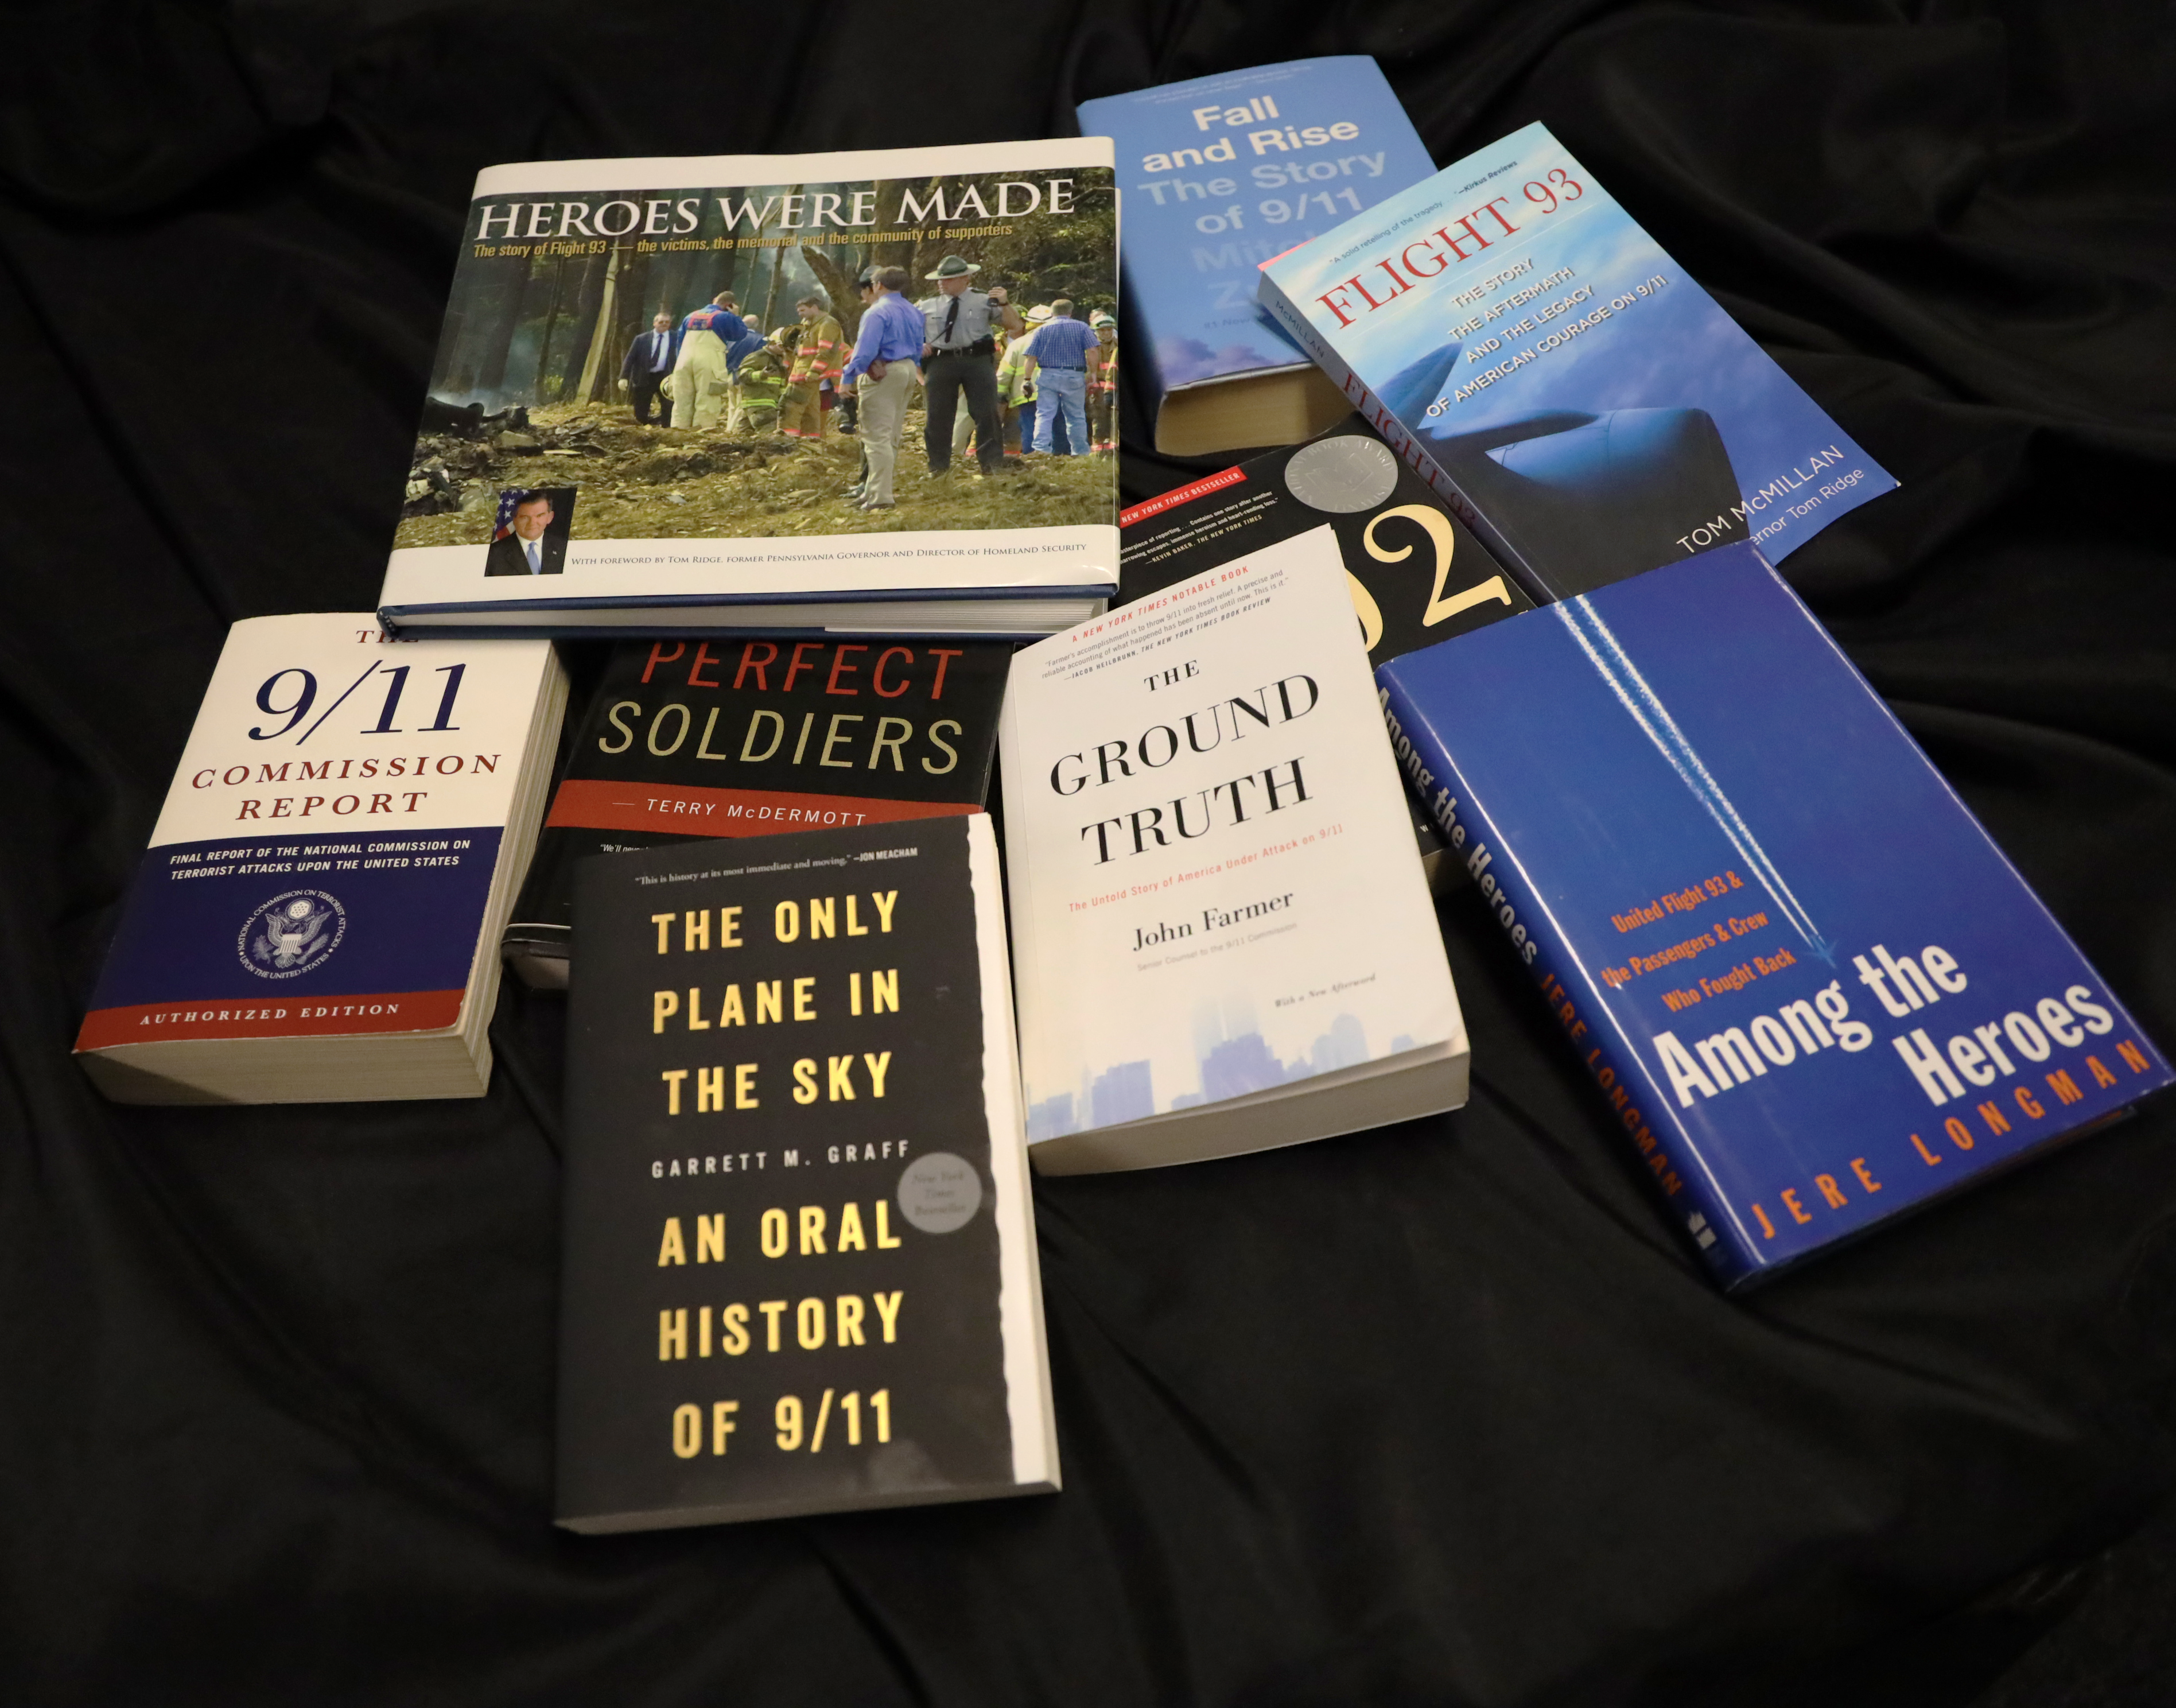 Suggested Flight 93 related books